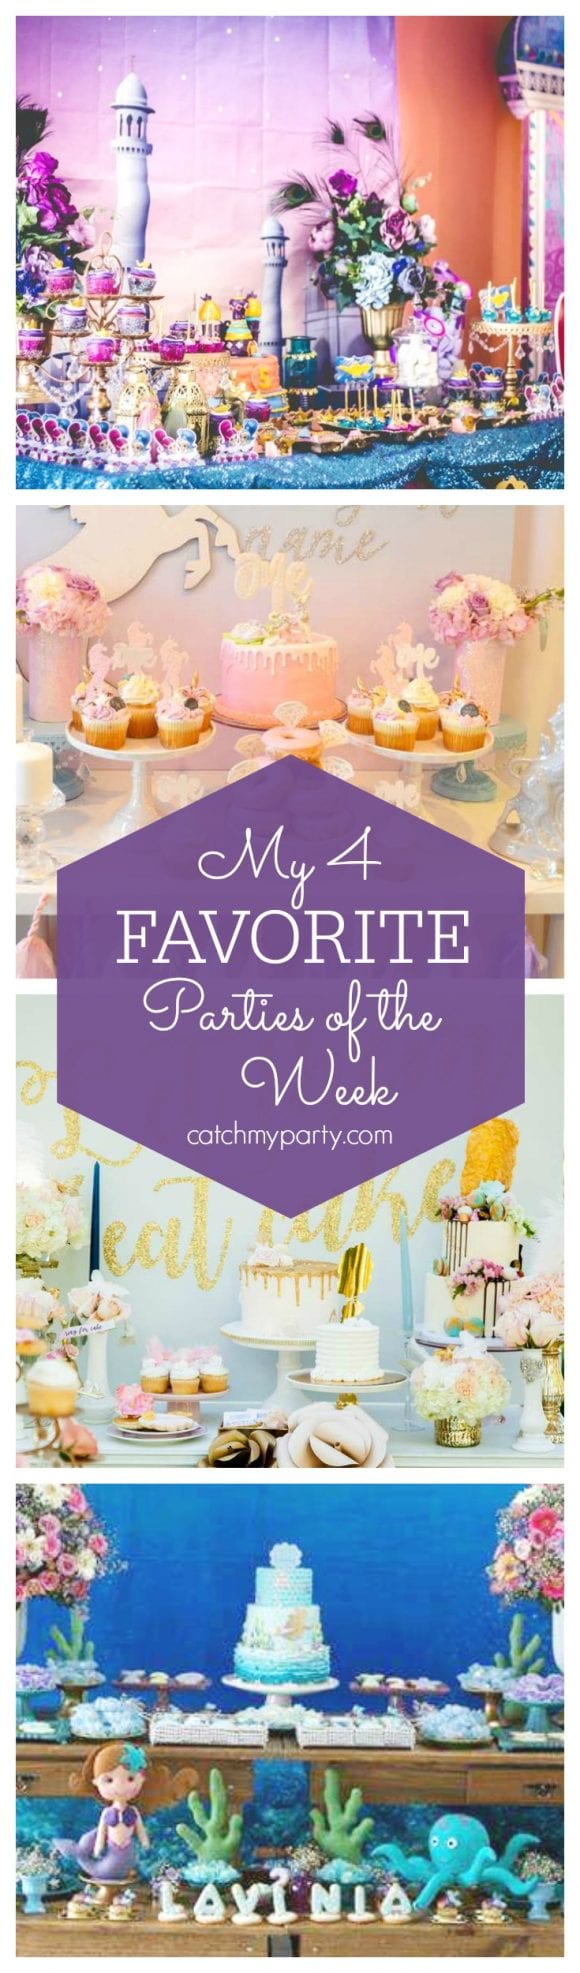 My 4 Favorite Parties of the Week are a magical Shimmer and Shine party, a pretty unicorn party, a wonderful vintage garden bridal shower and a cute mermaid birthday party | CatchMyParty.com